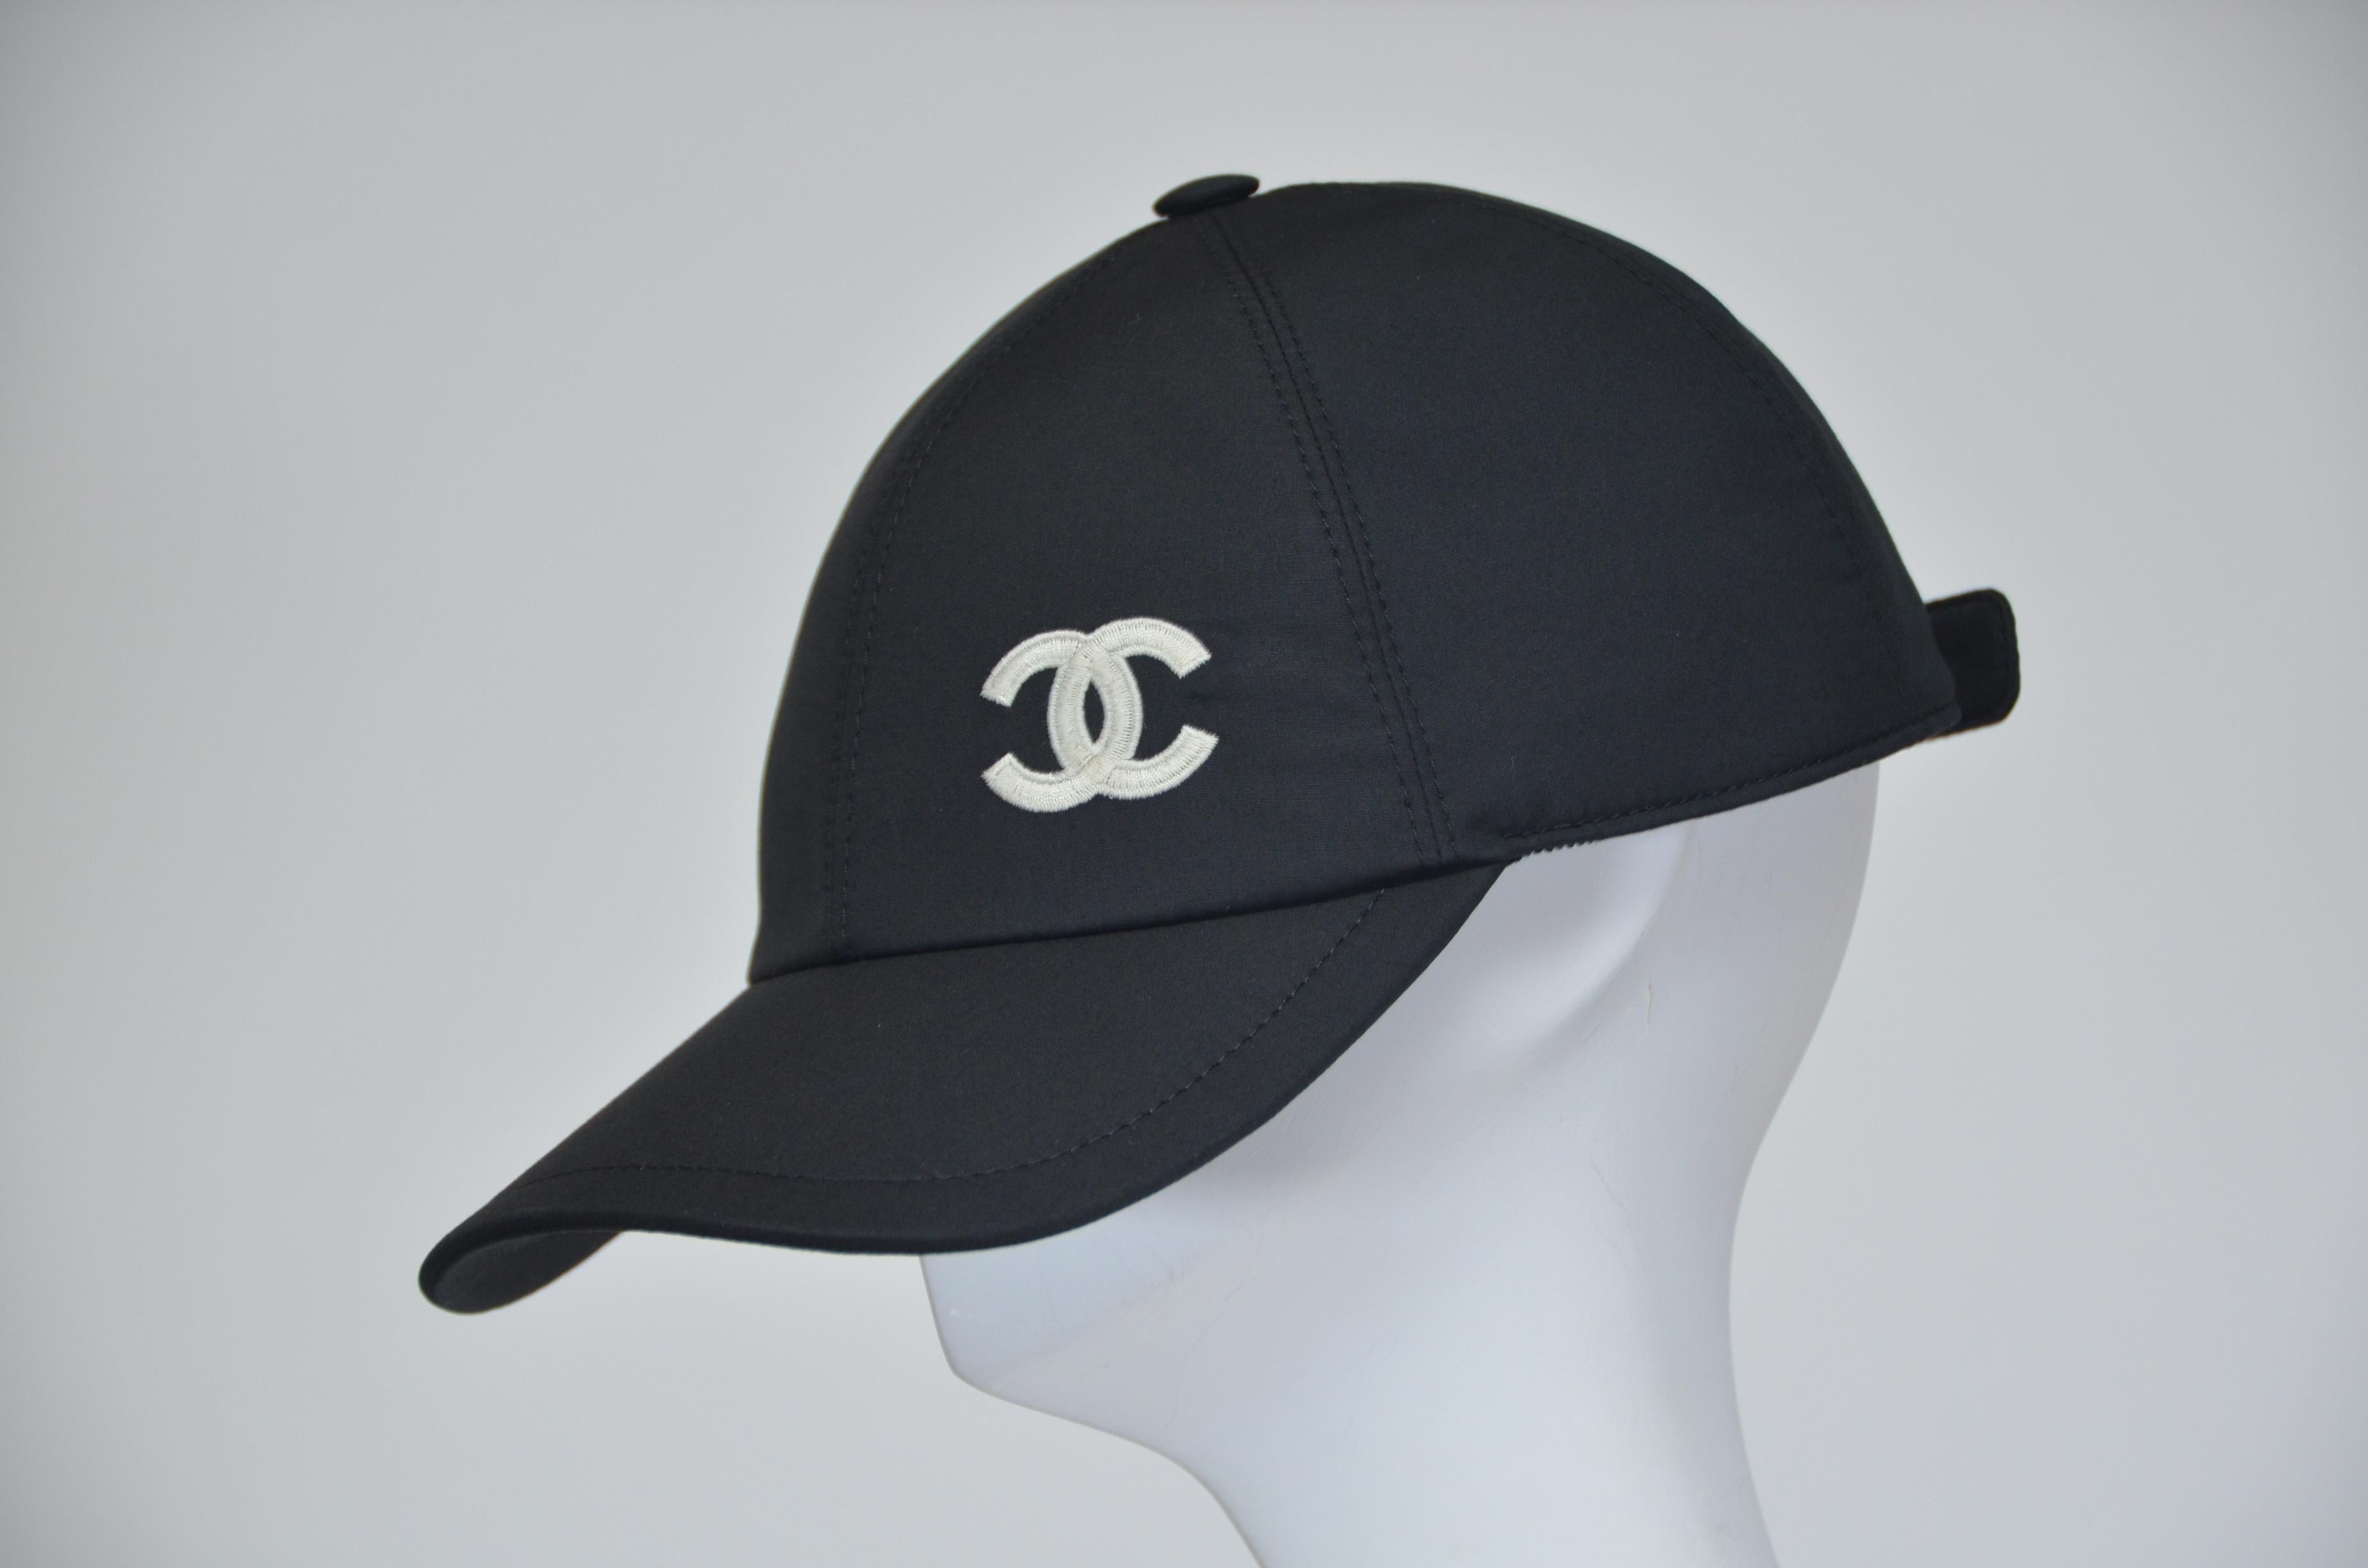 100% authentic guaranteed Chanel hat 
New with tags
Made in Italy
100% cotton 
ONE SIZE FITS ALL
FINAL SALE